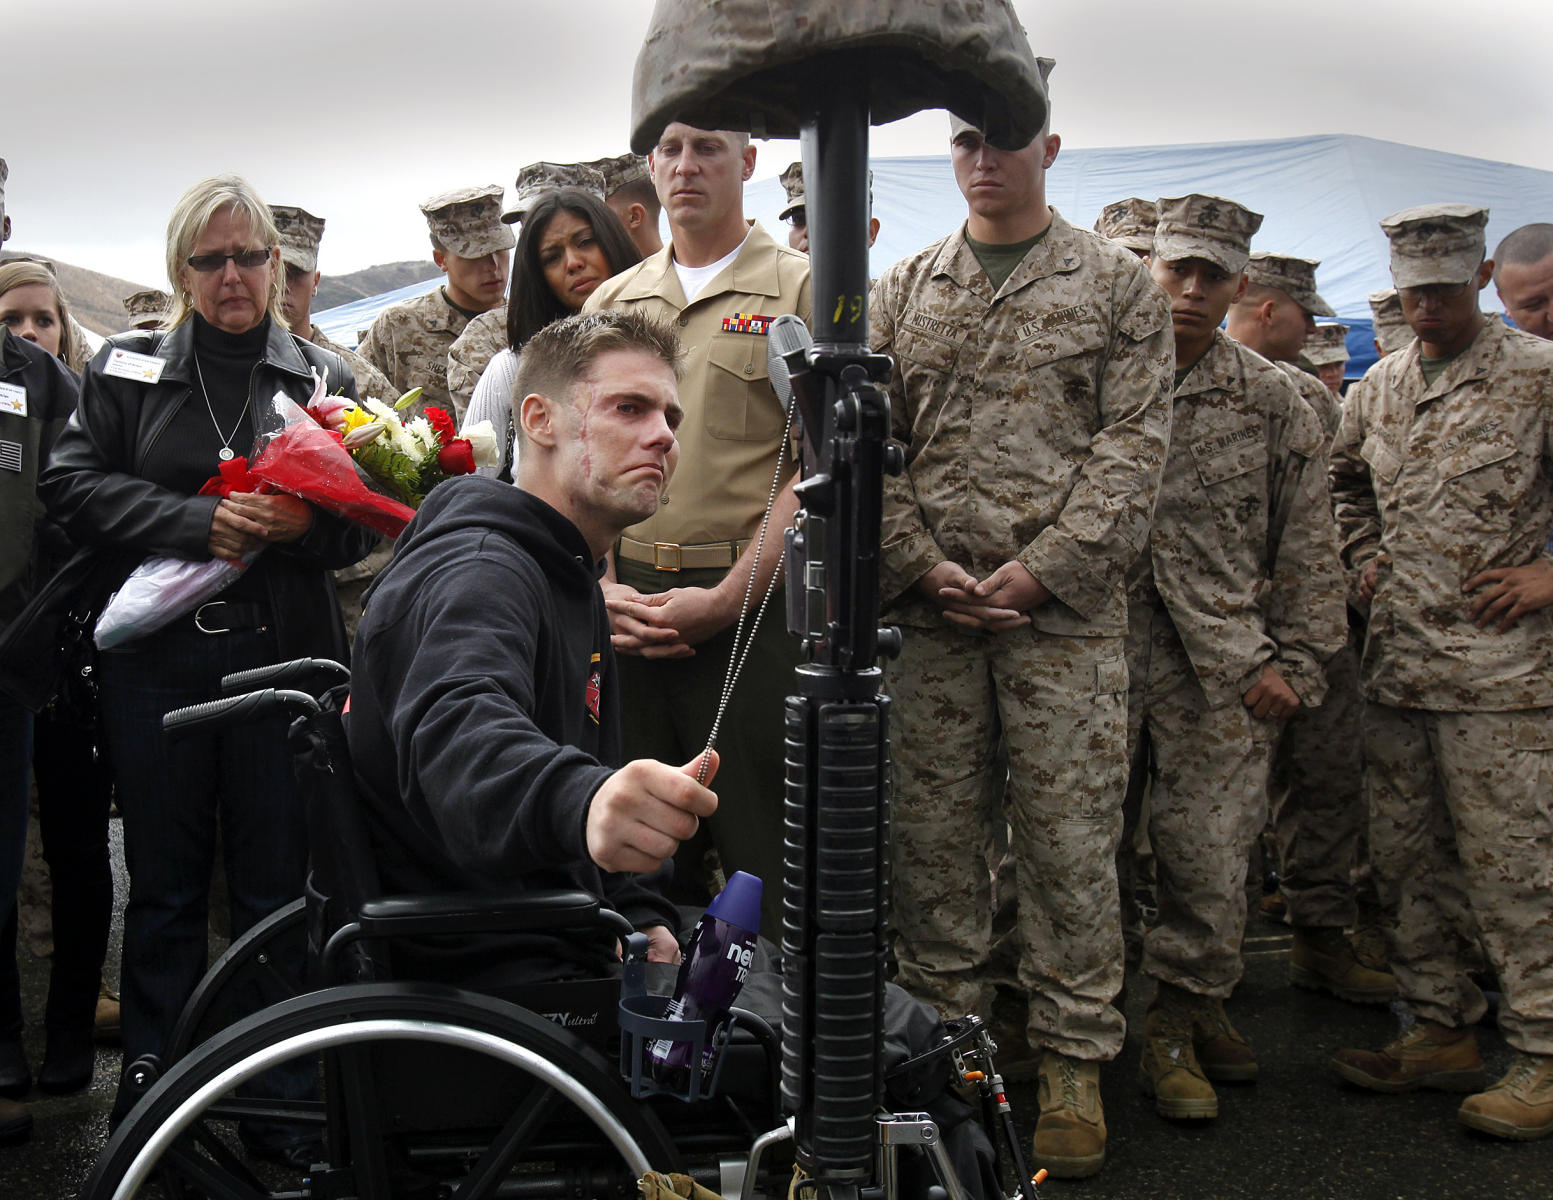 Injured Marine who came to pay respect to his fallen comrades, Camp Pendleton, CA